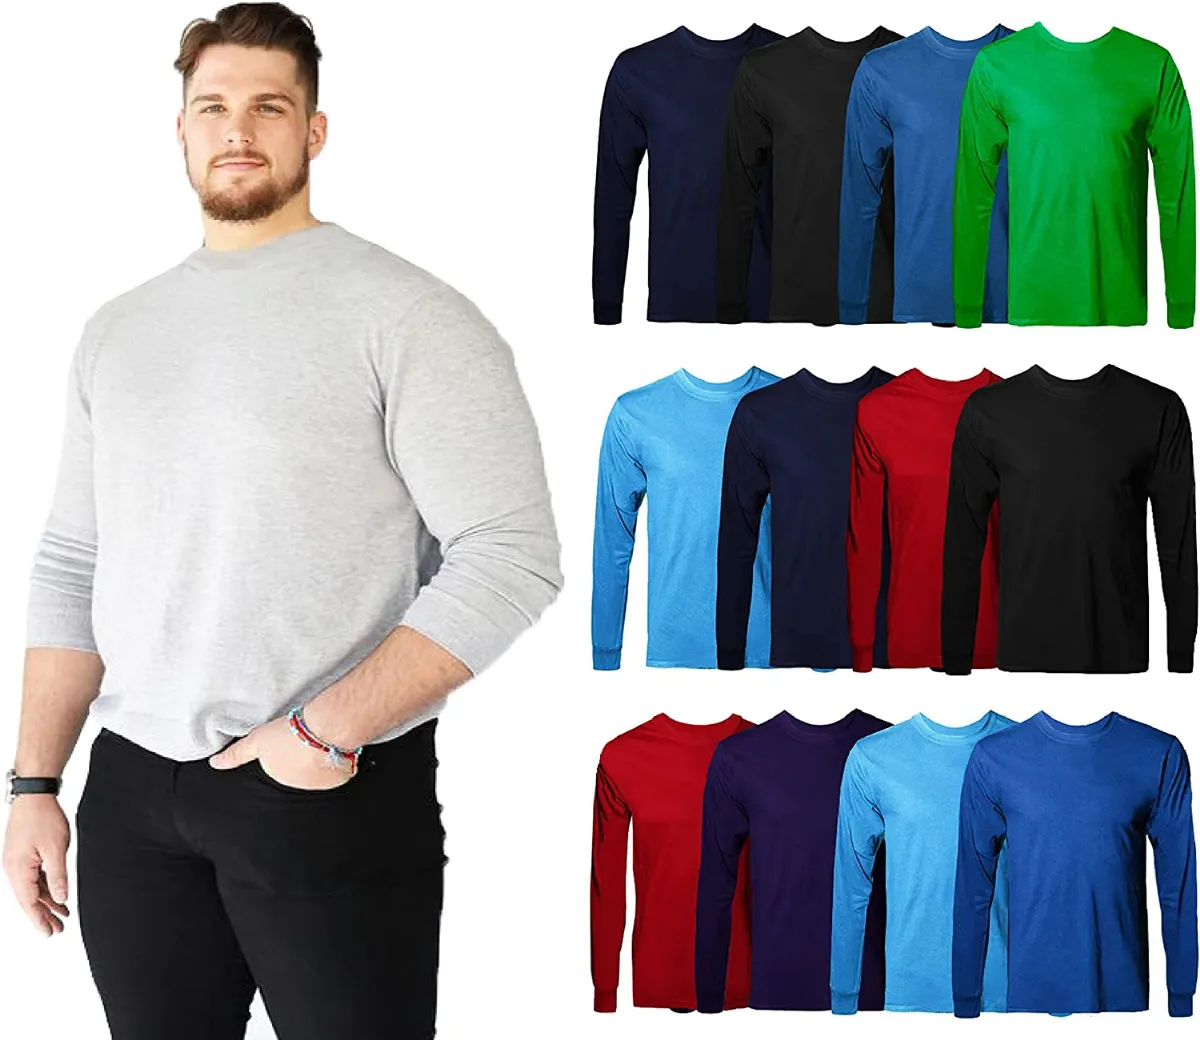 12 Pieces Mens Cotton Long Sleeve Tee Shirt Assorted Colors Size 5x Large - Mens T-Shirts